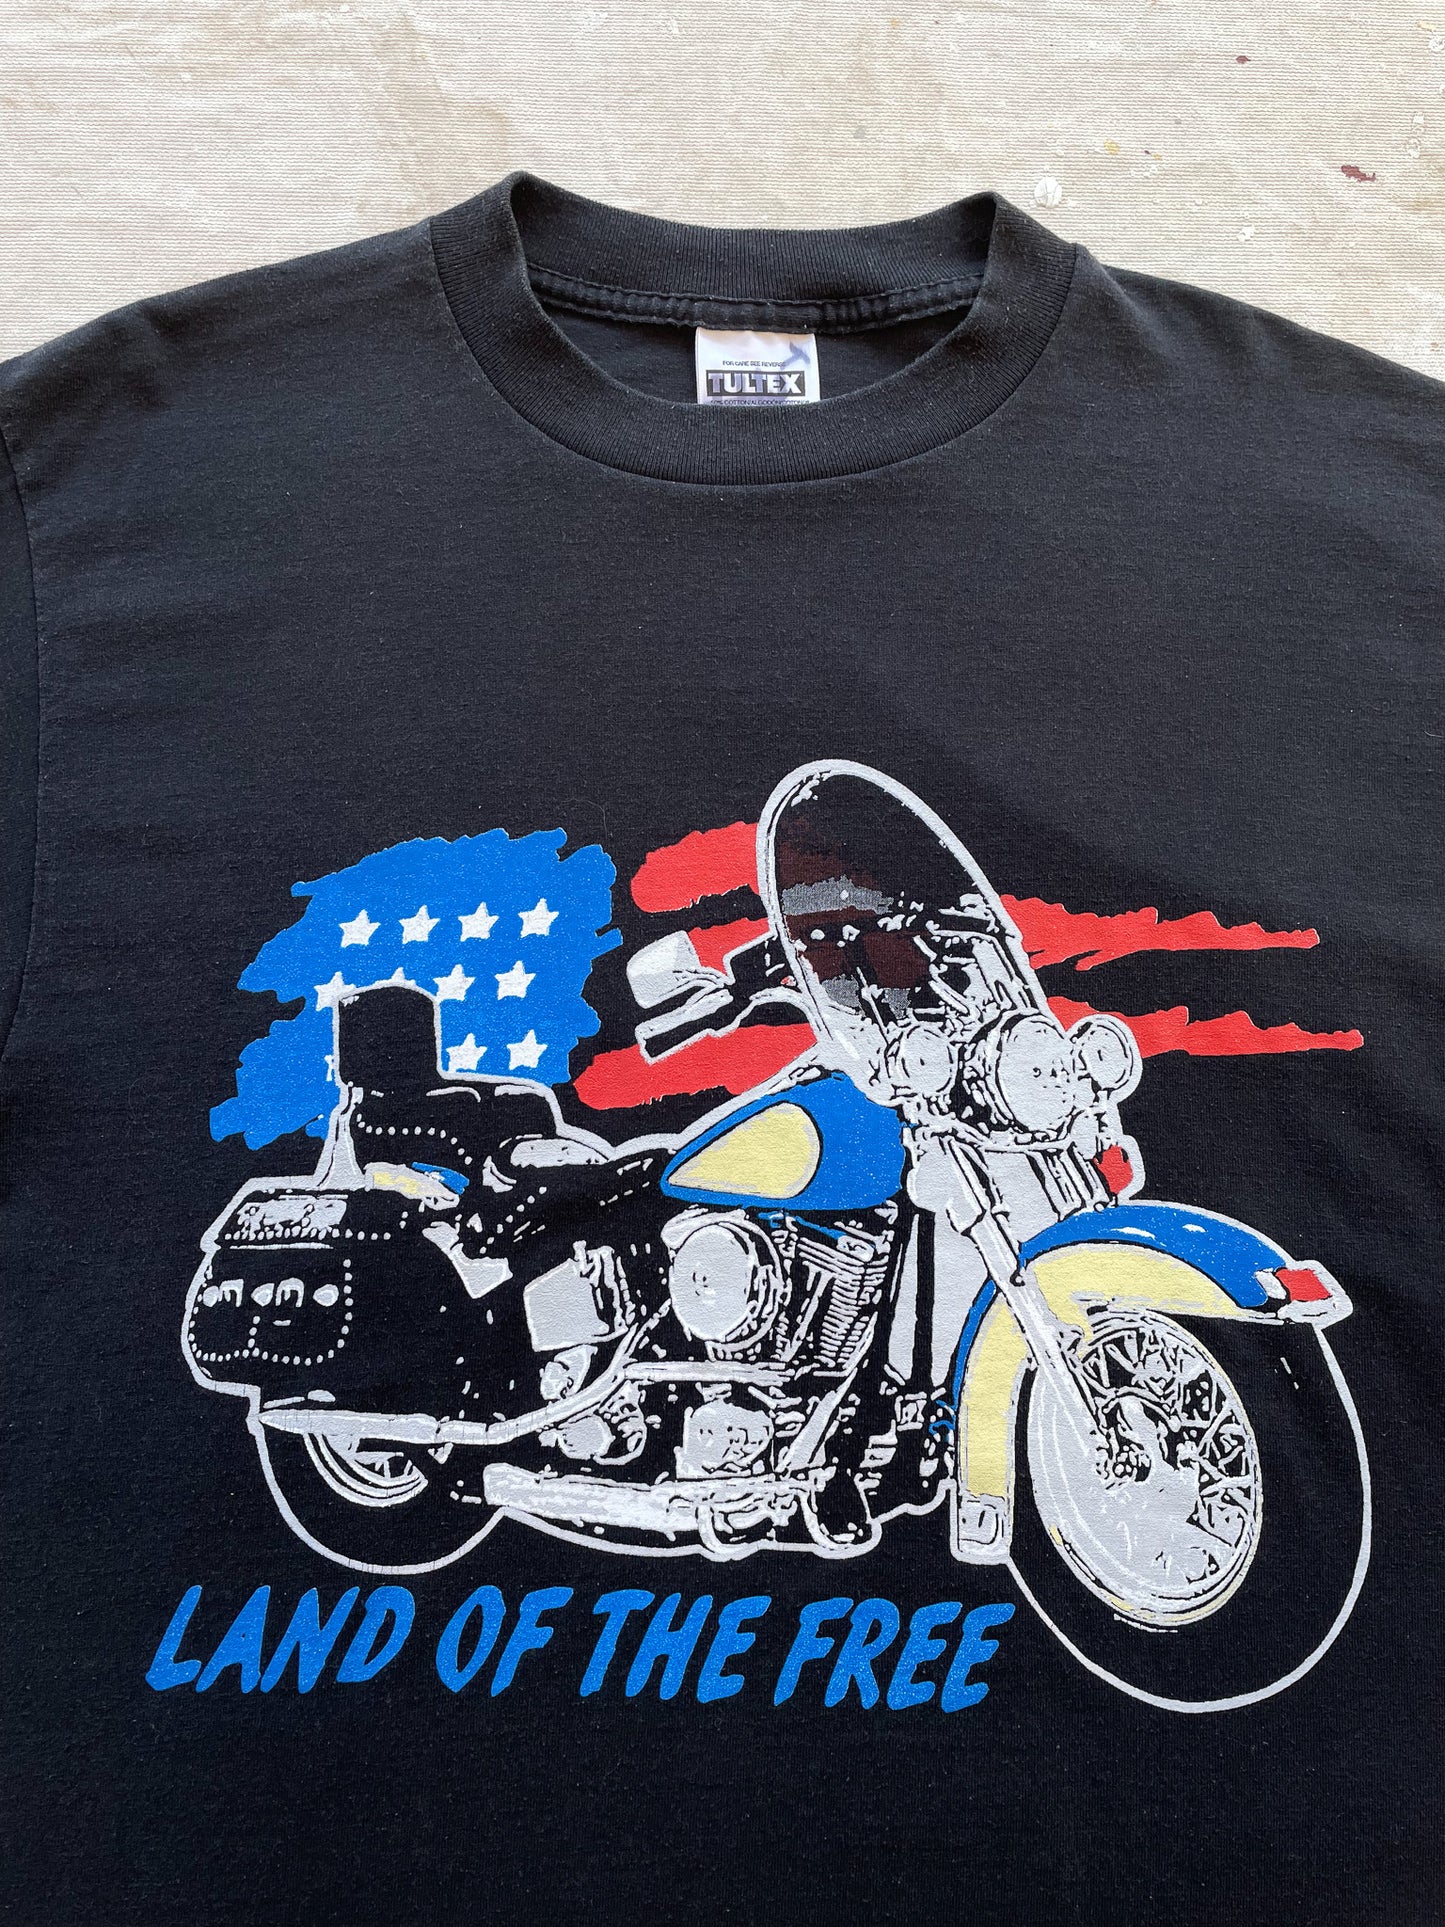 Land Of The Free Motorcycle T-Shirt—[L]